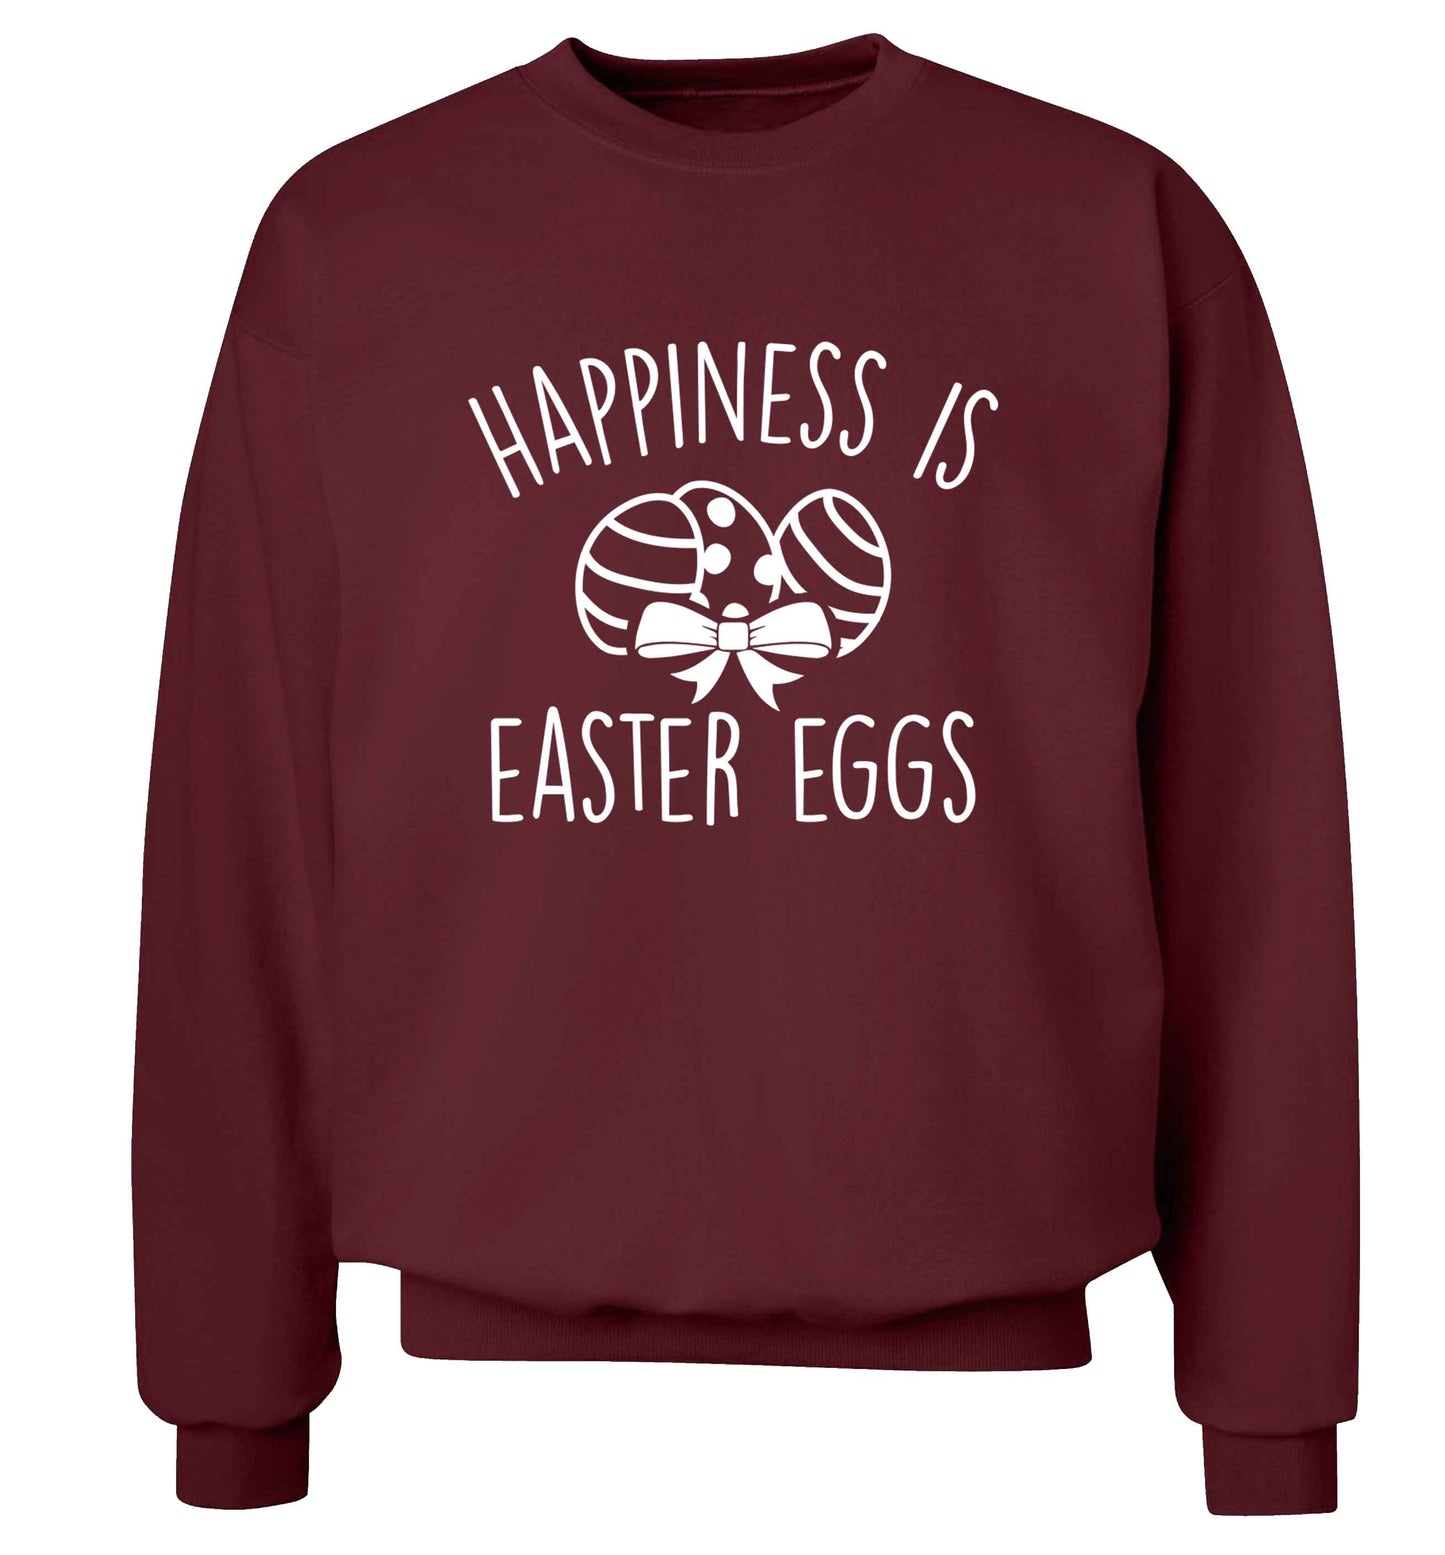 Happiness is Easter eggs adult's unisex maroon sweater 2XL